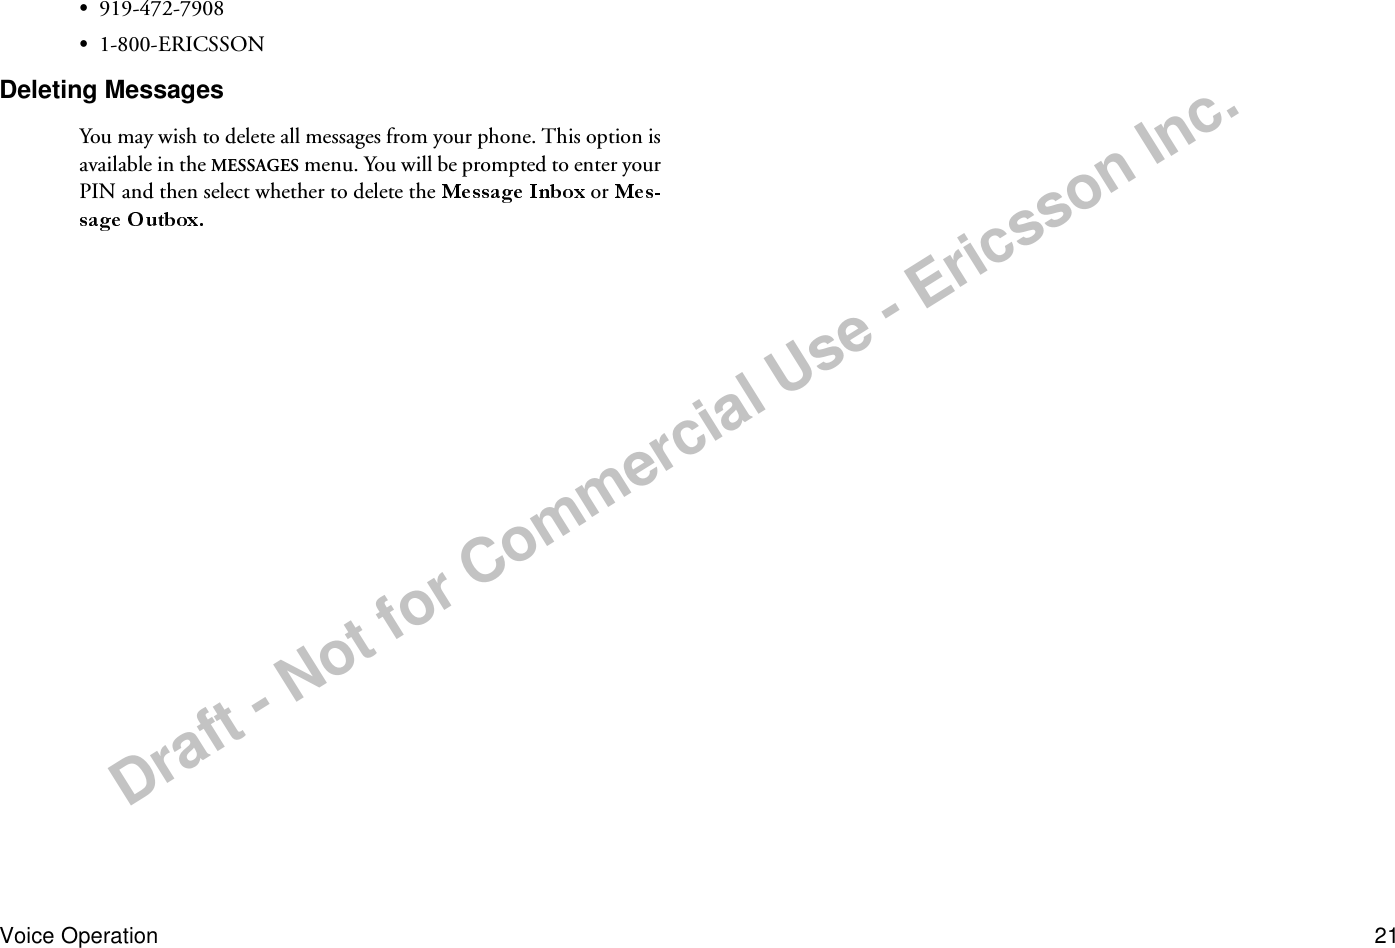 Draft - Not for Commercial Use - Ericsson Inc.Voice Operation 21•919-472-7908•1-800-ERICSSONDeleting MessagesYou may wish to delete all messages from your phone. This option is available in the MESSAGES menu. You will be prompted to enter your PIN and then select whether to delete the  or  